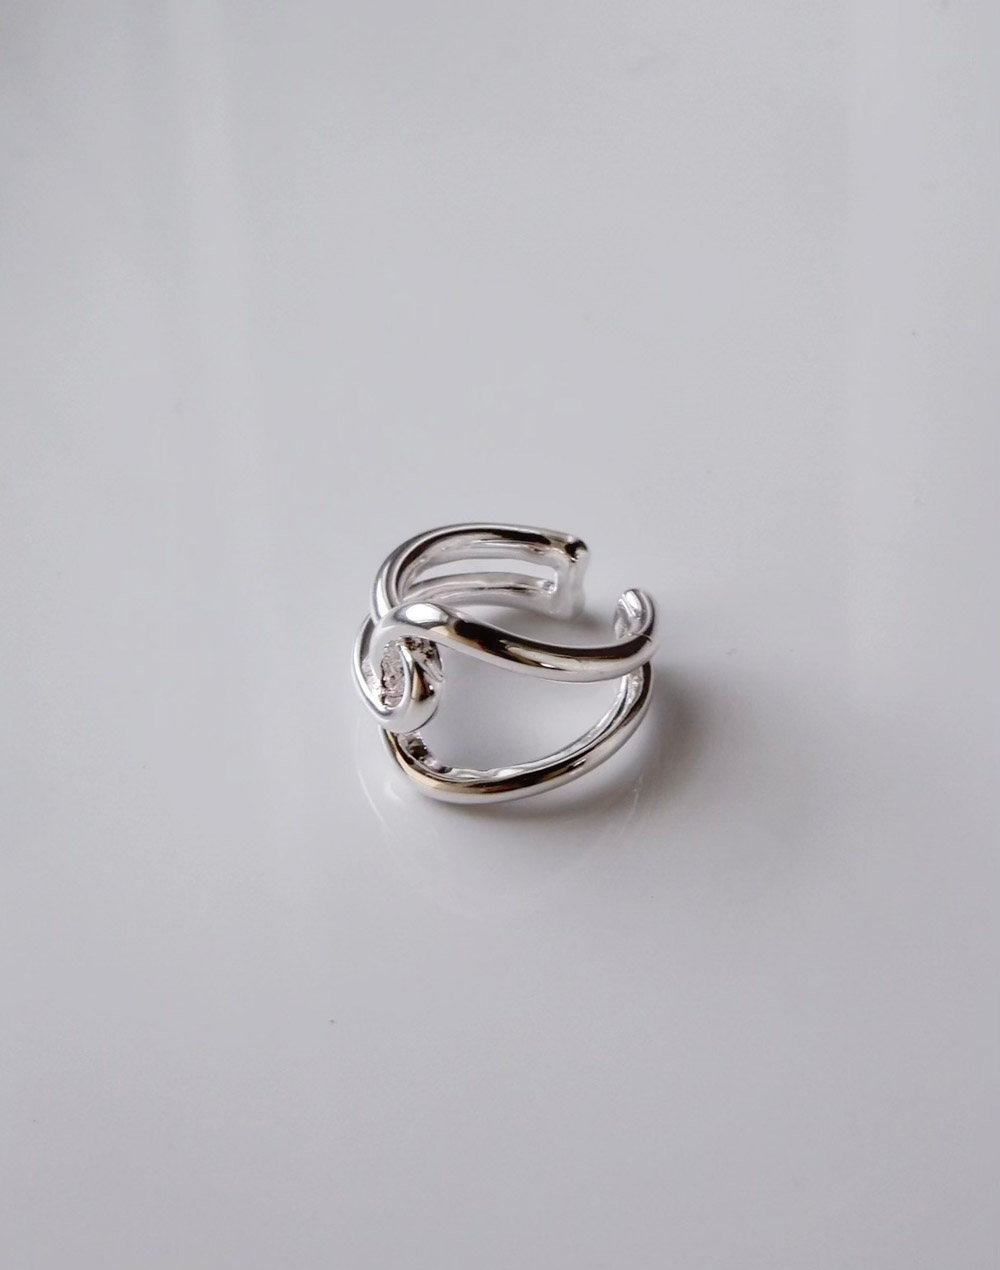 Double Line Ring・d280873（ジュエリー/リング）| shiho_takechi | 東京ガールズマーケット